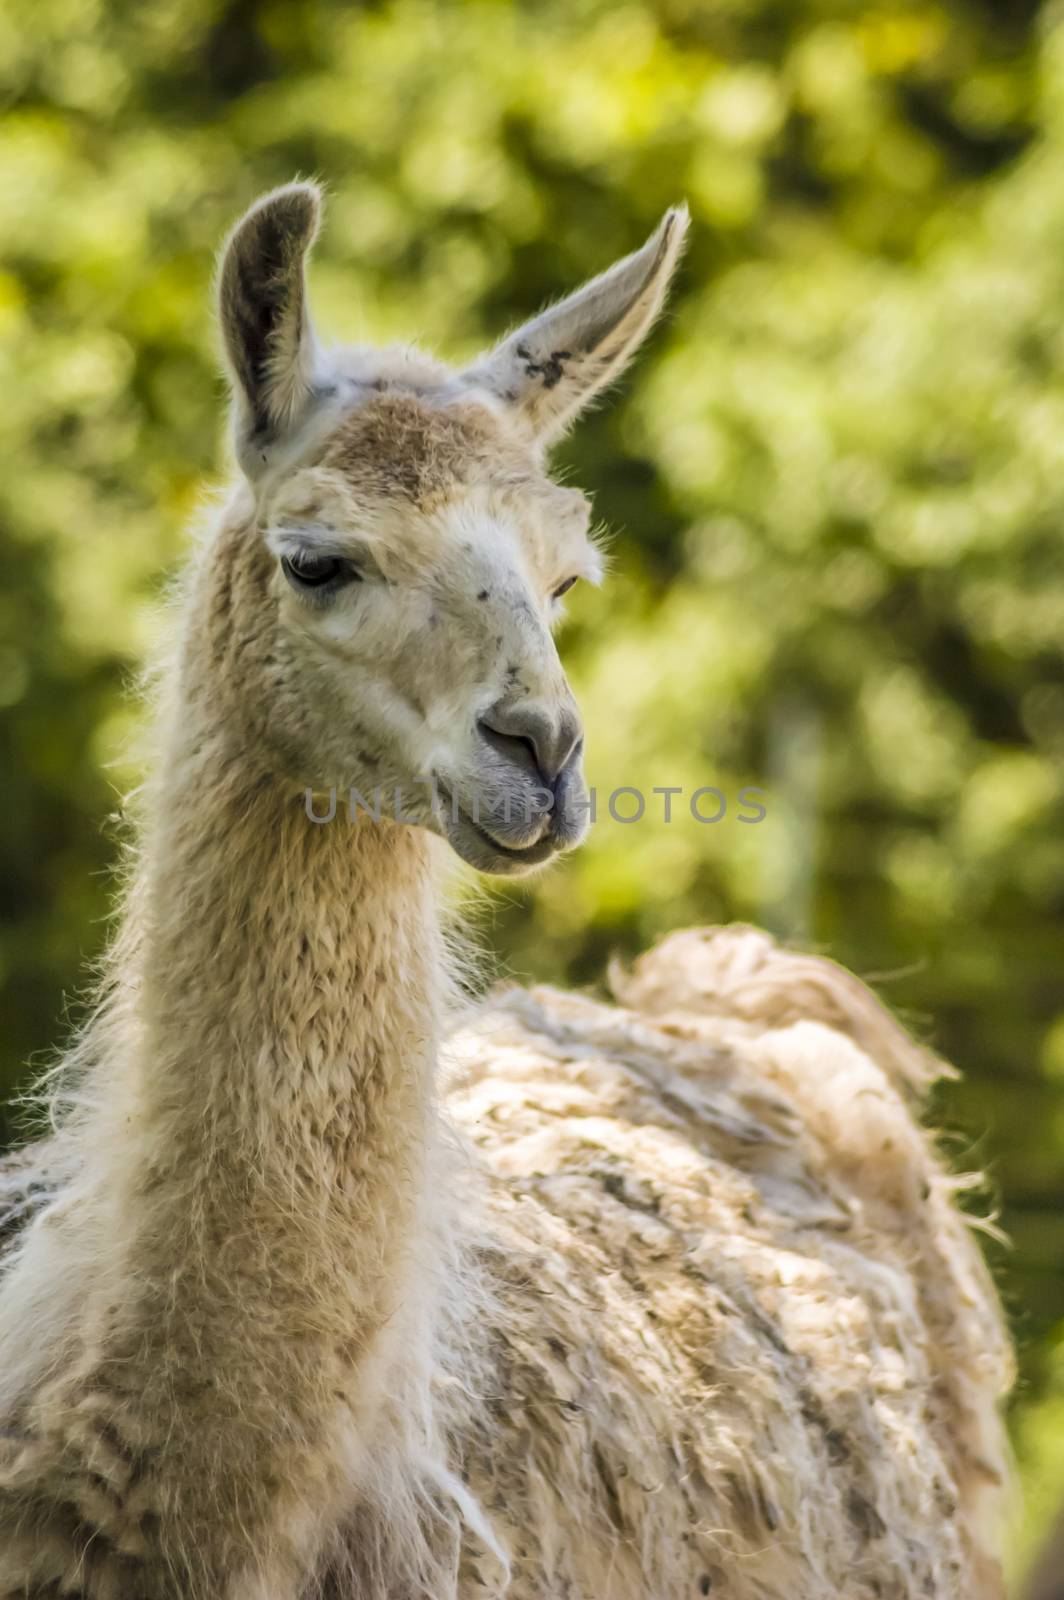 close-up shot of a llama with blurry background